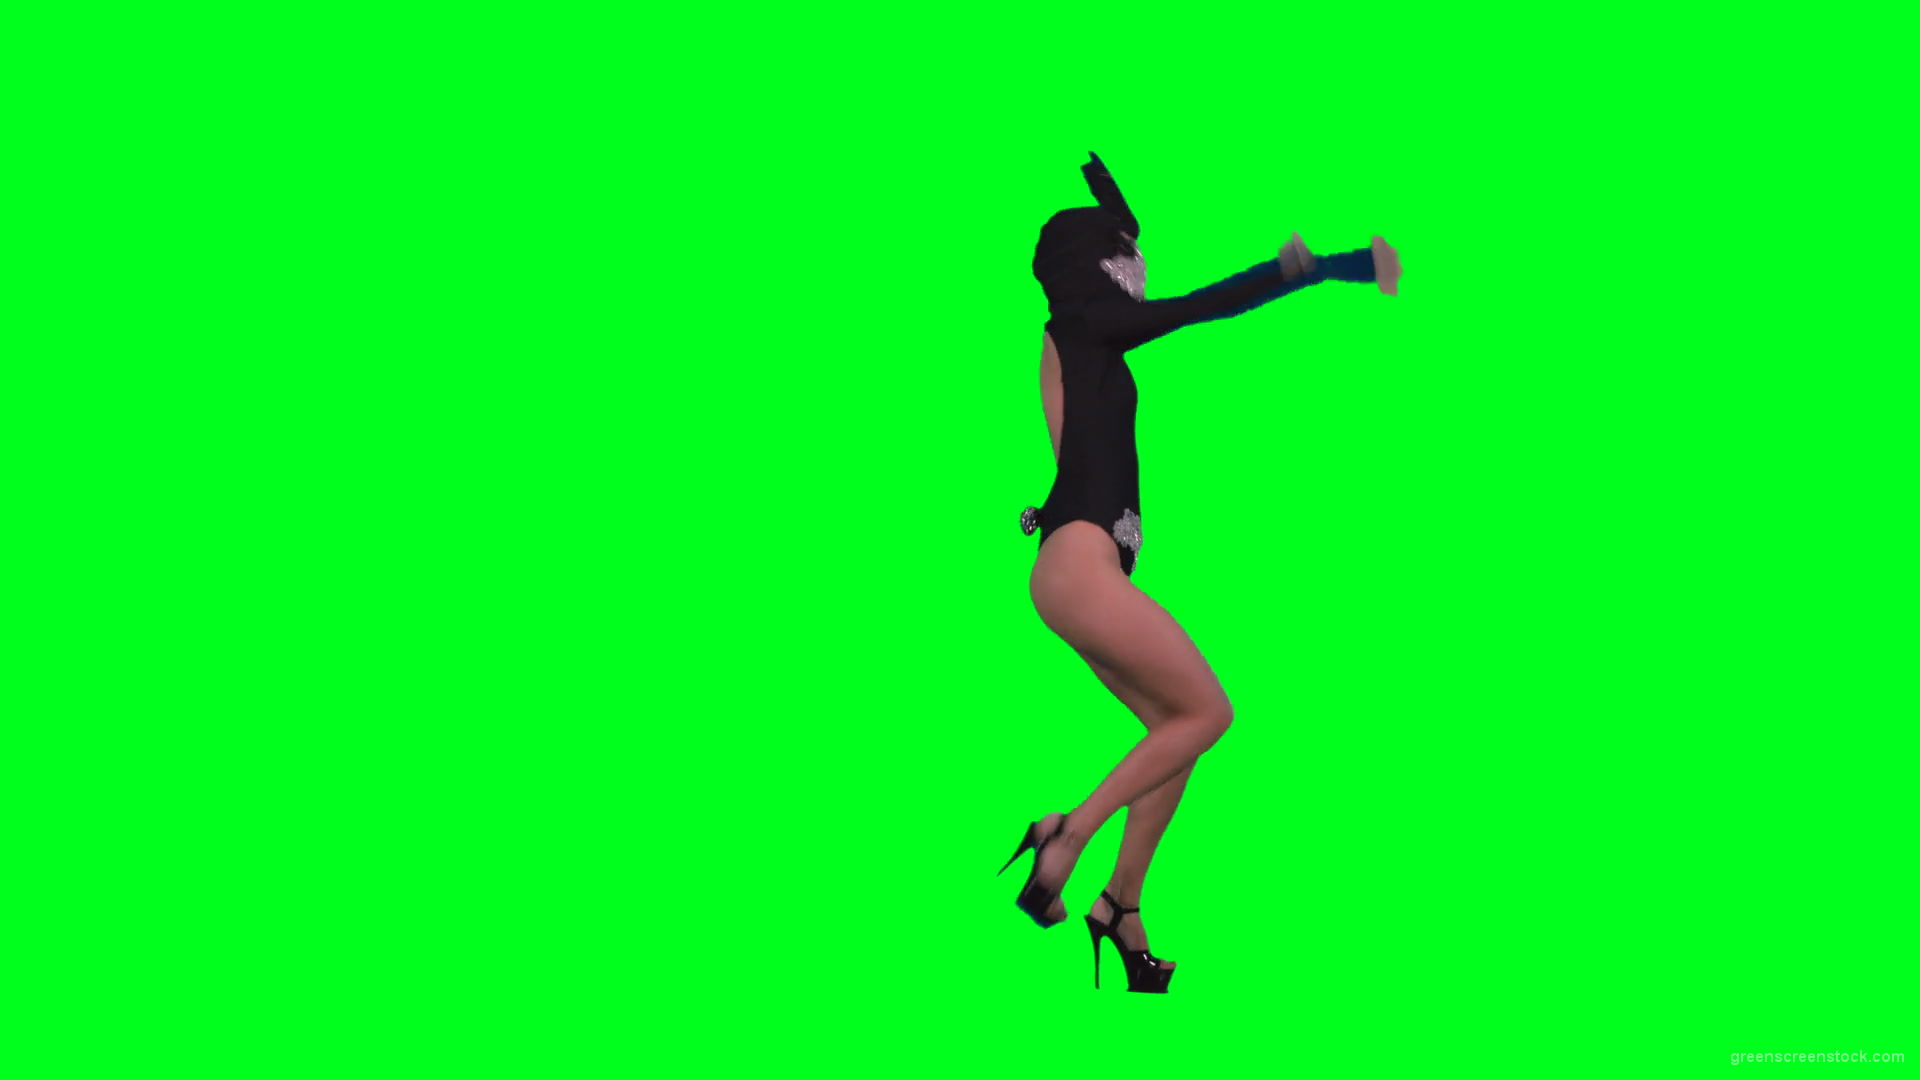 Amazing-black-banny-rabbit-girl-dancing-go-go-isolated-on-green-screen-RAVE-Video-Footage-1920_004 Green Screen Stock